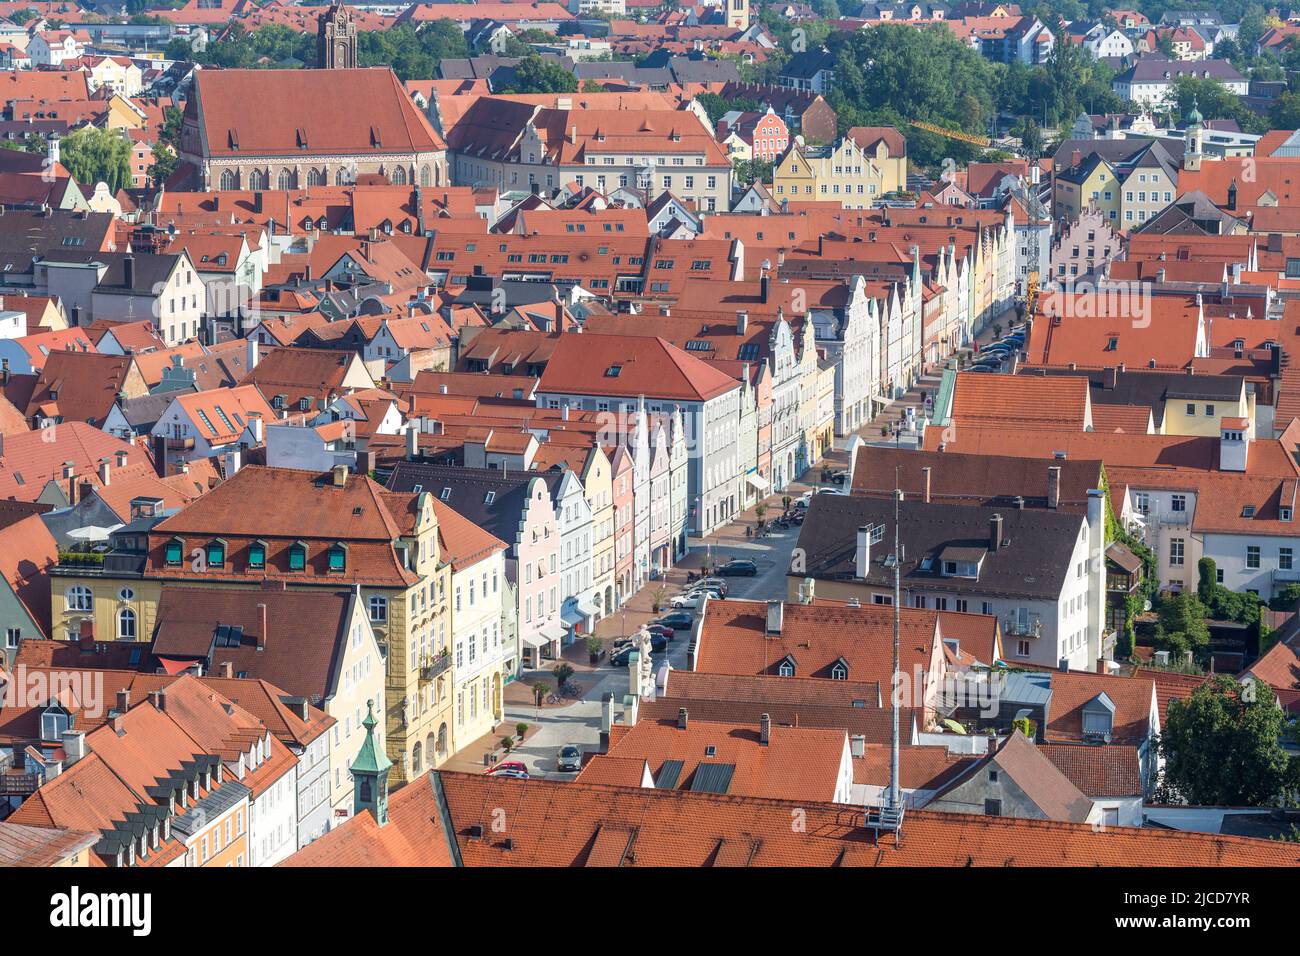 Landshut, Germany - Aug 15, 2021: High angle view of the Altstadt (old town) of Landshut. Stock Photo